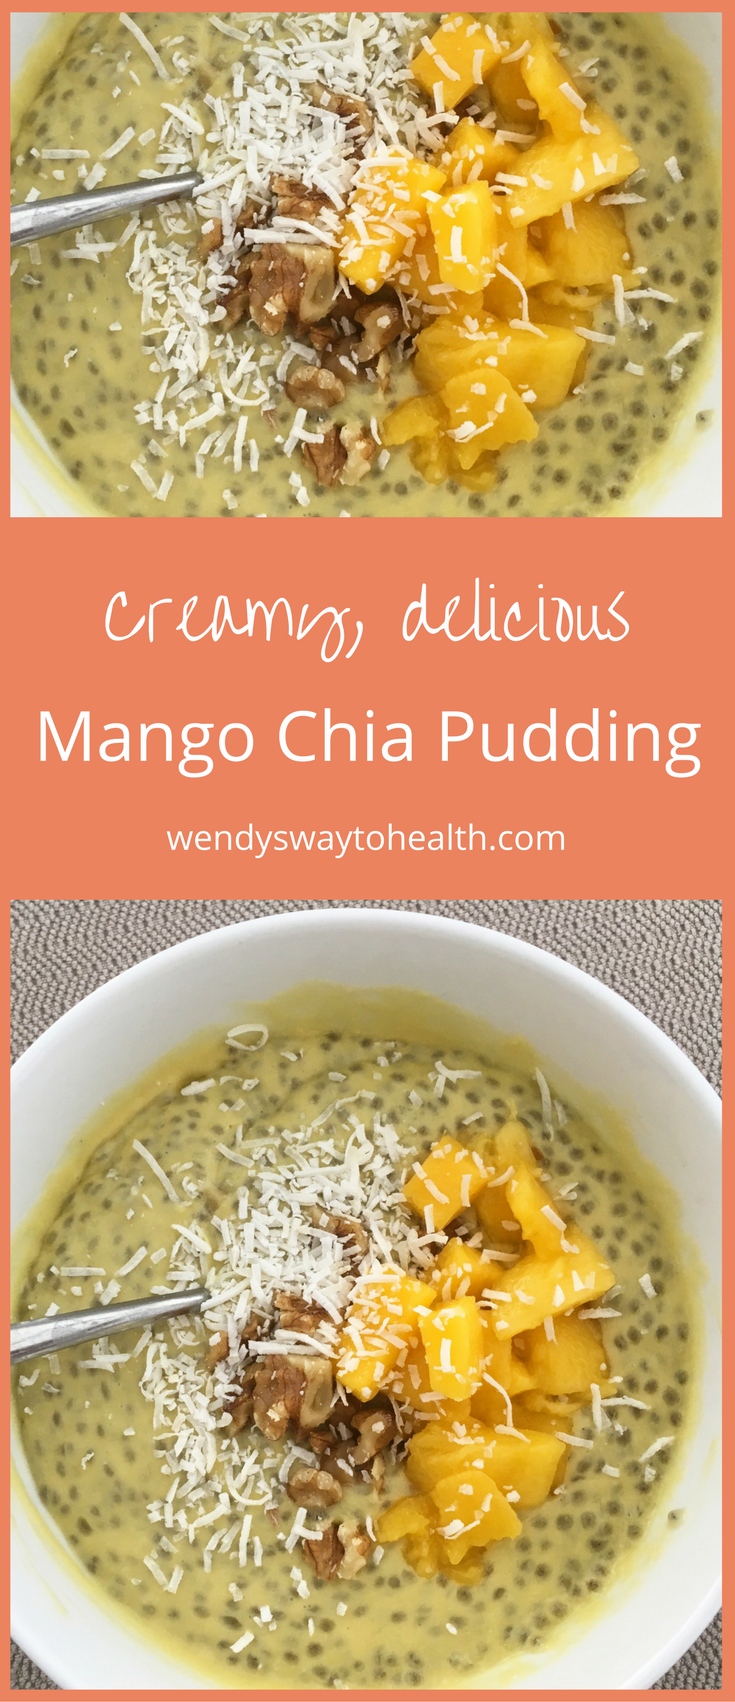 This creamy mango chia pudding from Wendy's Way to Health makes a delicious, healthy breakfast